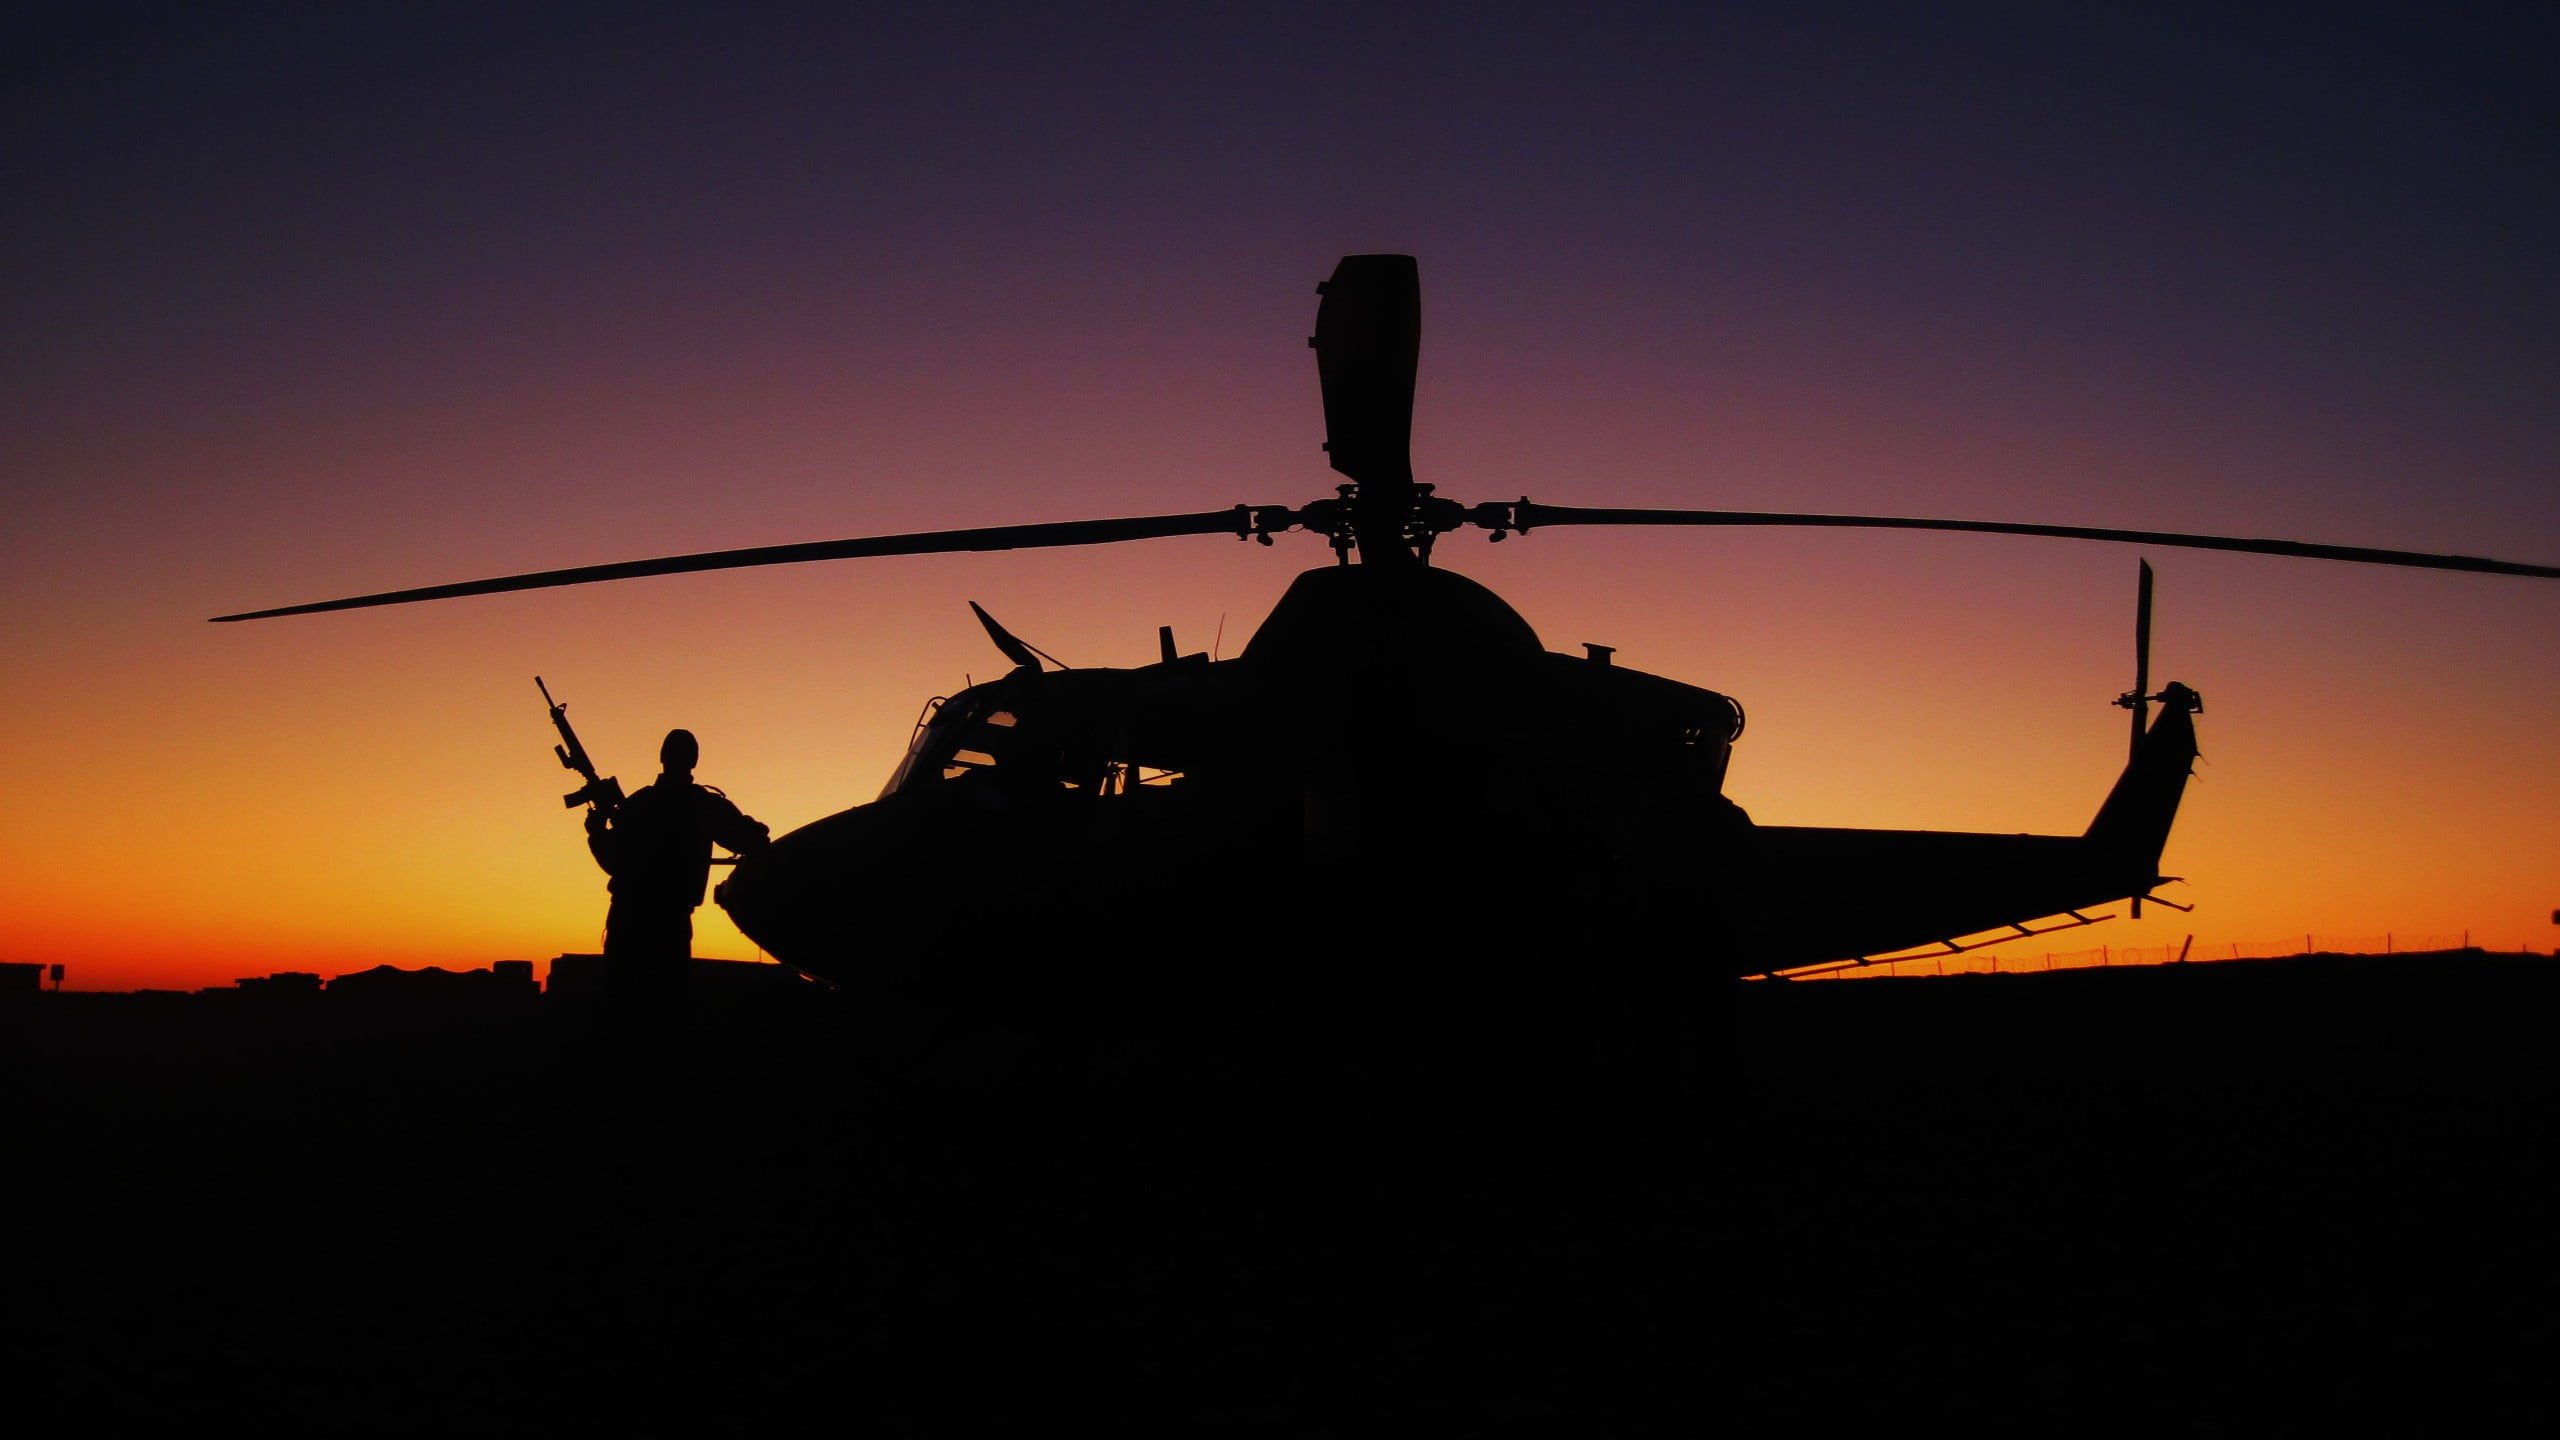 silhouette of helicopter, military, aircraft, military aircraft, helicopters